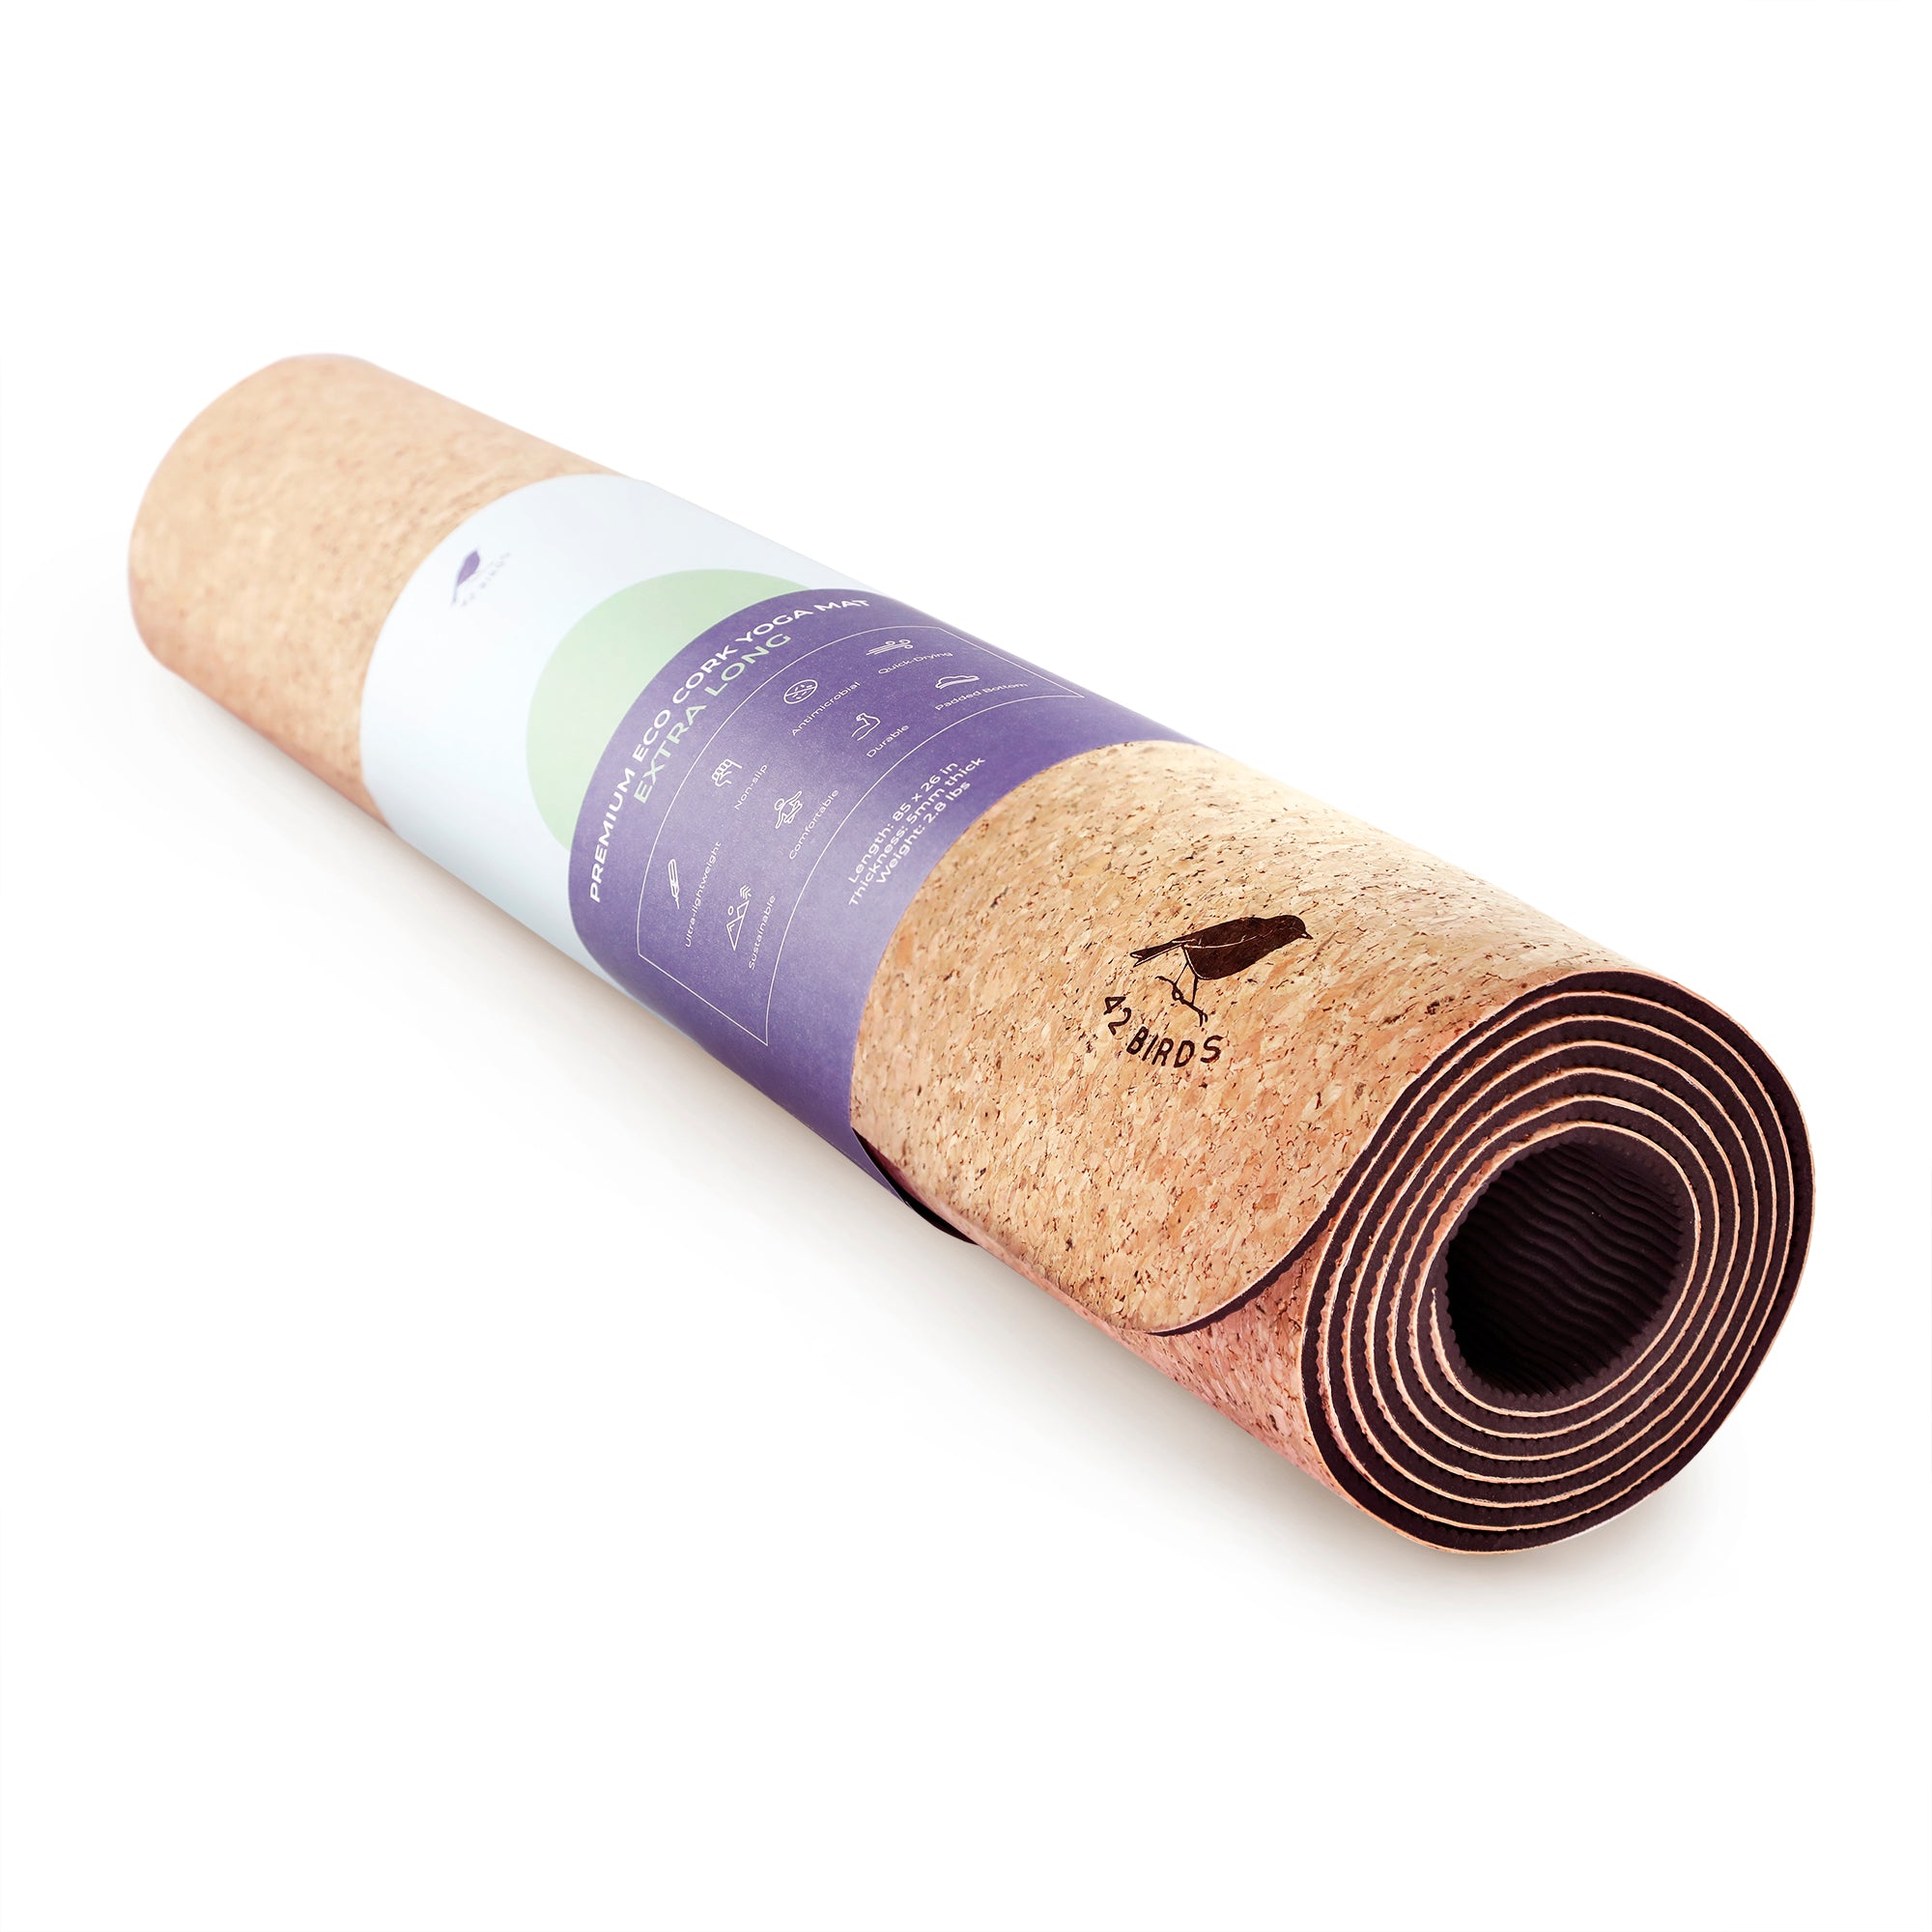 Extra Thick (3/4in) Yoga Mat - Black